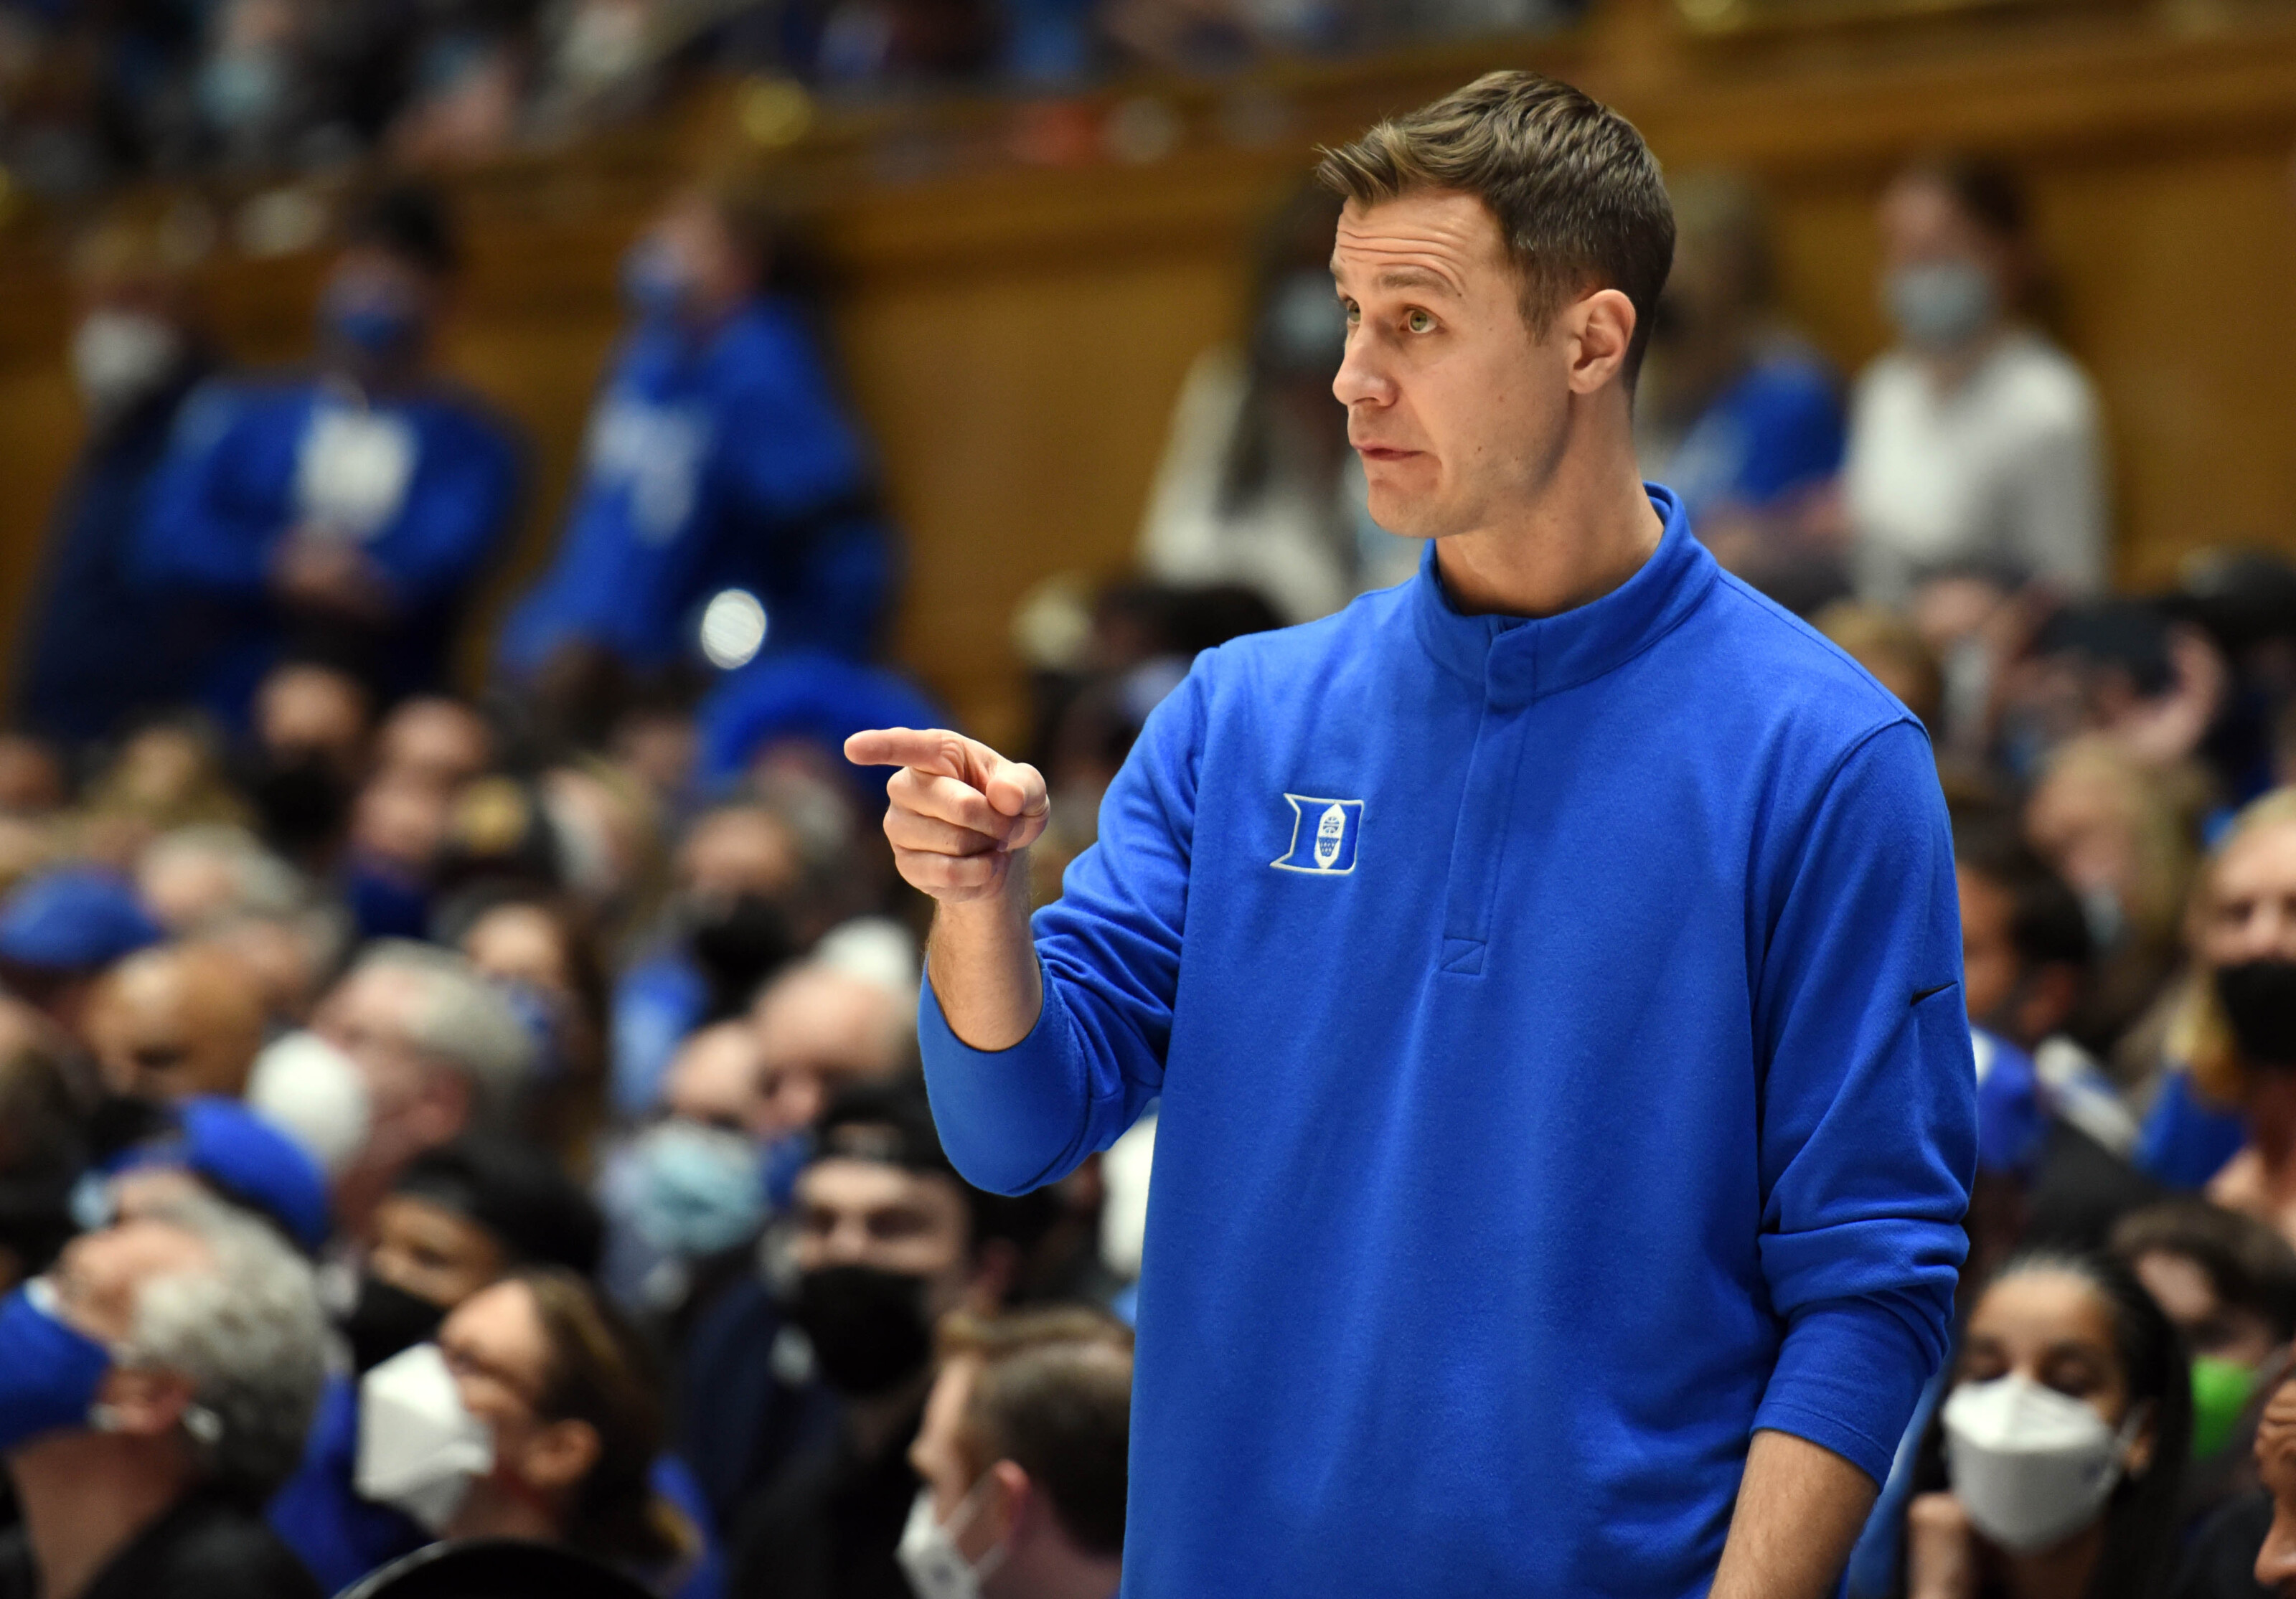 Jon Scheyer: 5 things to know about Duke's next coach